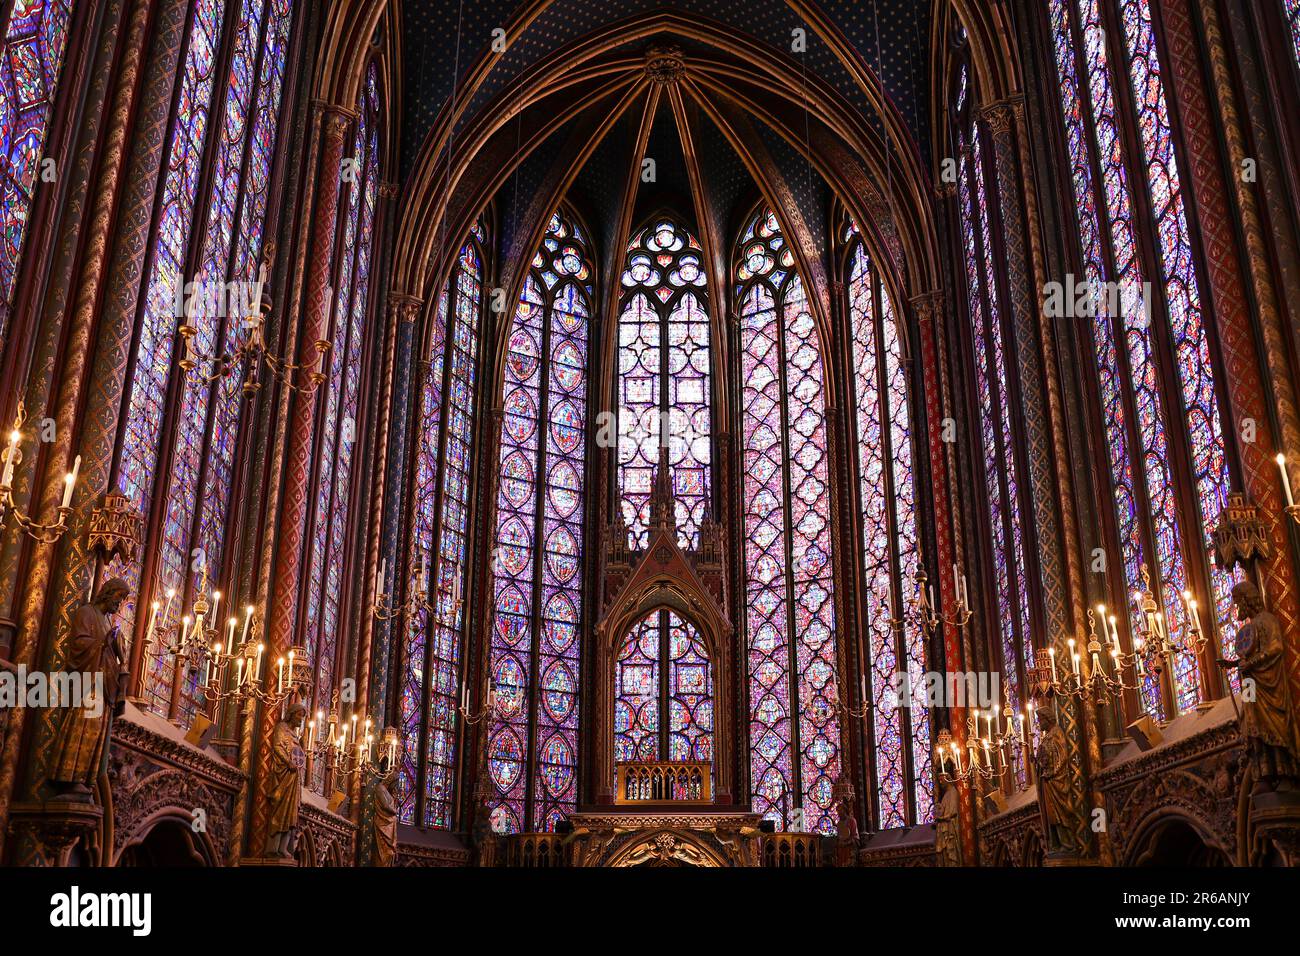 PARIS, FRANCE - OCTOBER 26, 2022: Interior View of Sainte-Chapelle, a Gothic Style Royal Chapel in the Centre of Paris. Stock Photo